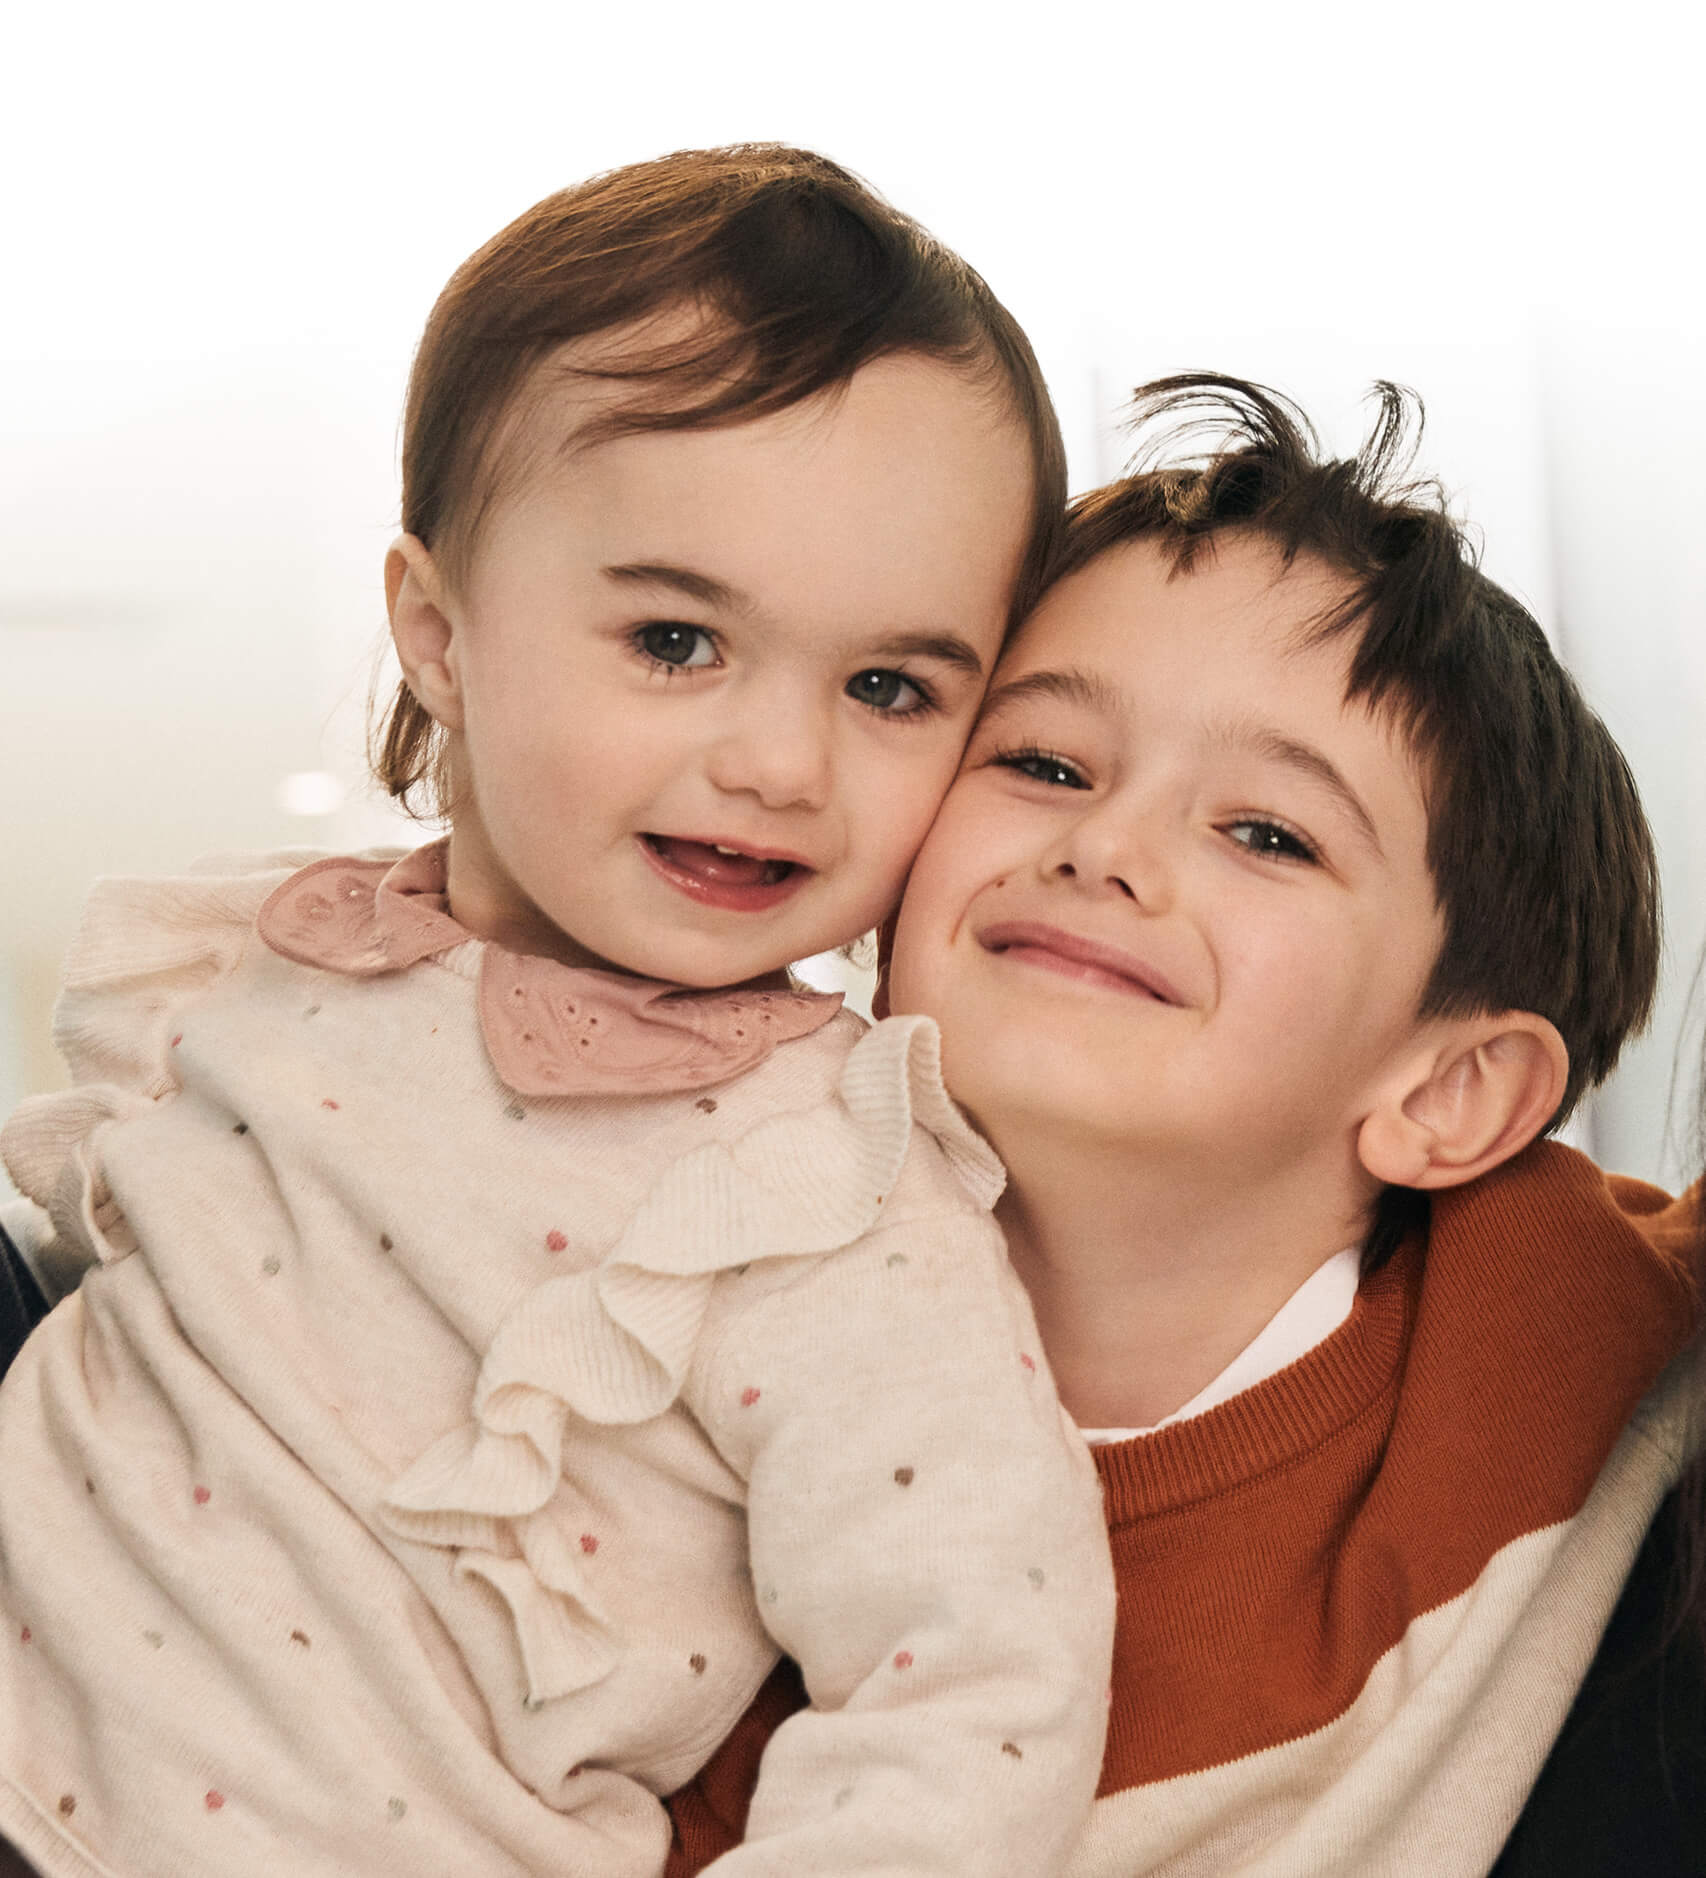 Two-year-old Viviane being hugged by her big brother, Édouard.